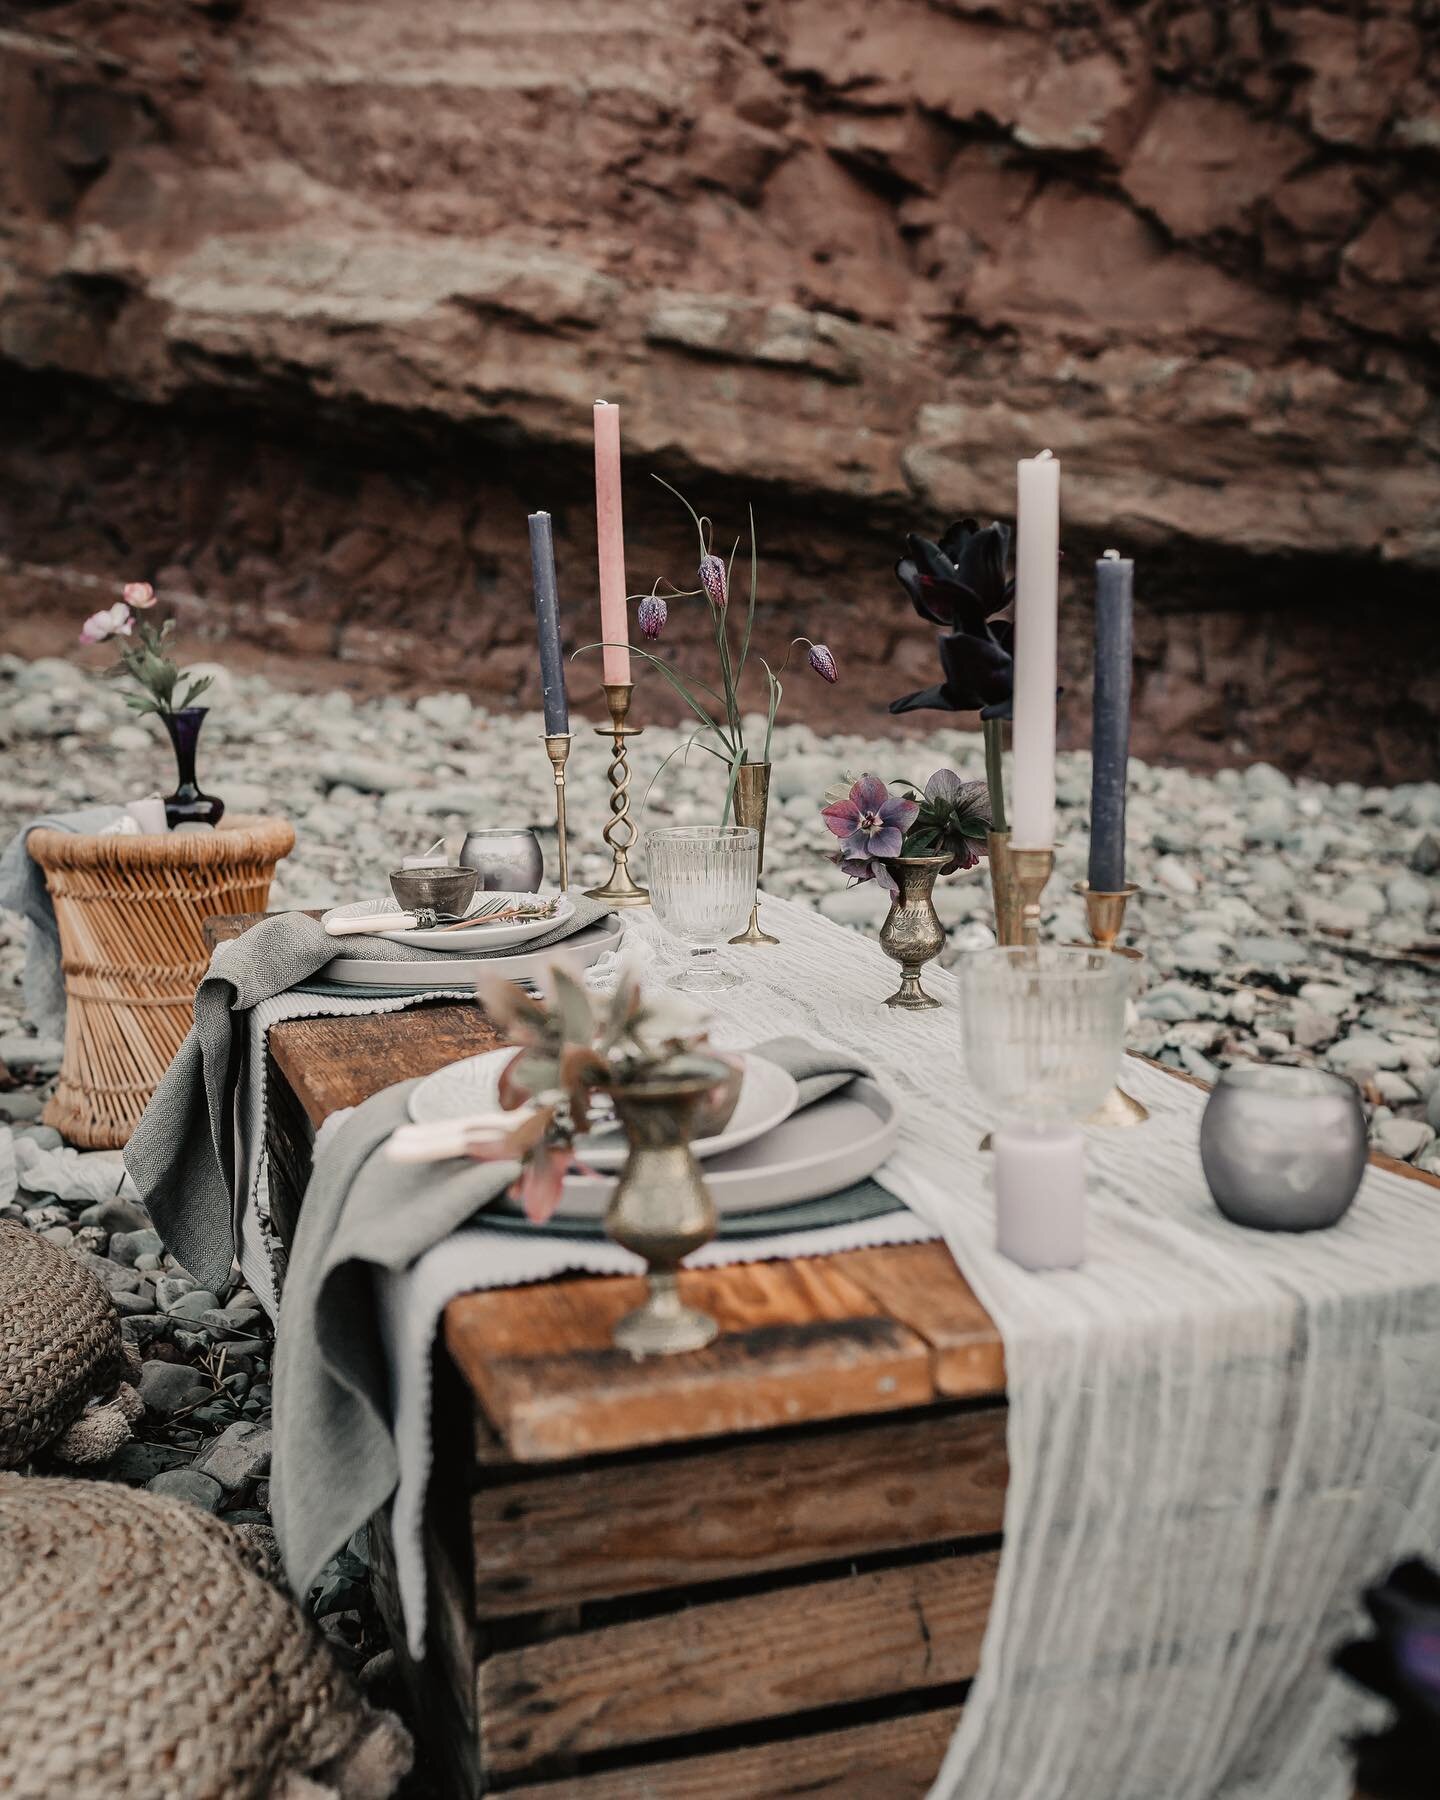 // W A R M E R  D A Y S //

Are taking us back to this intimate beach elopement down in Somerset. 
The costal waterfall and red rock cliffs were an incredible backdrop for this wonderful group of creatives. 
Every detail was planned to perfection, fr